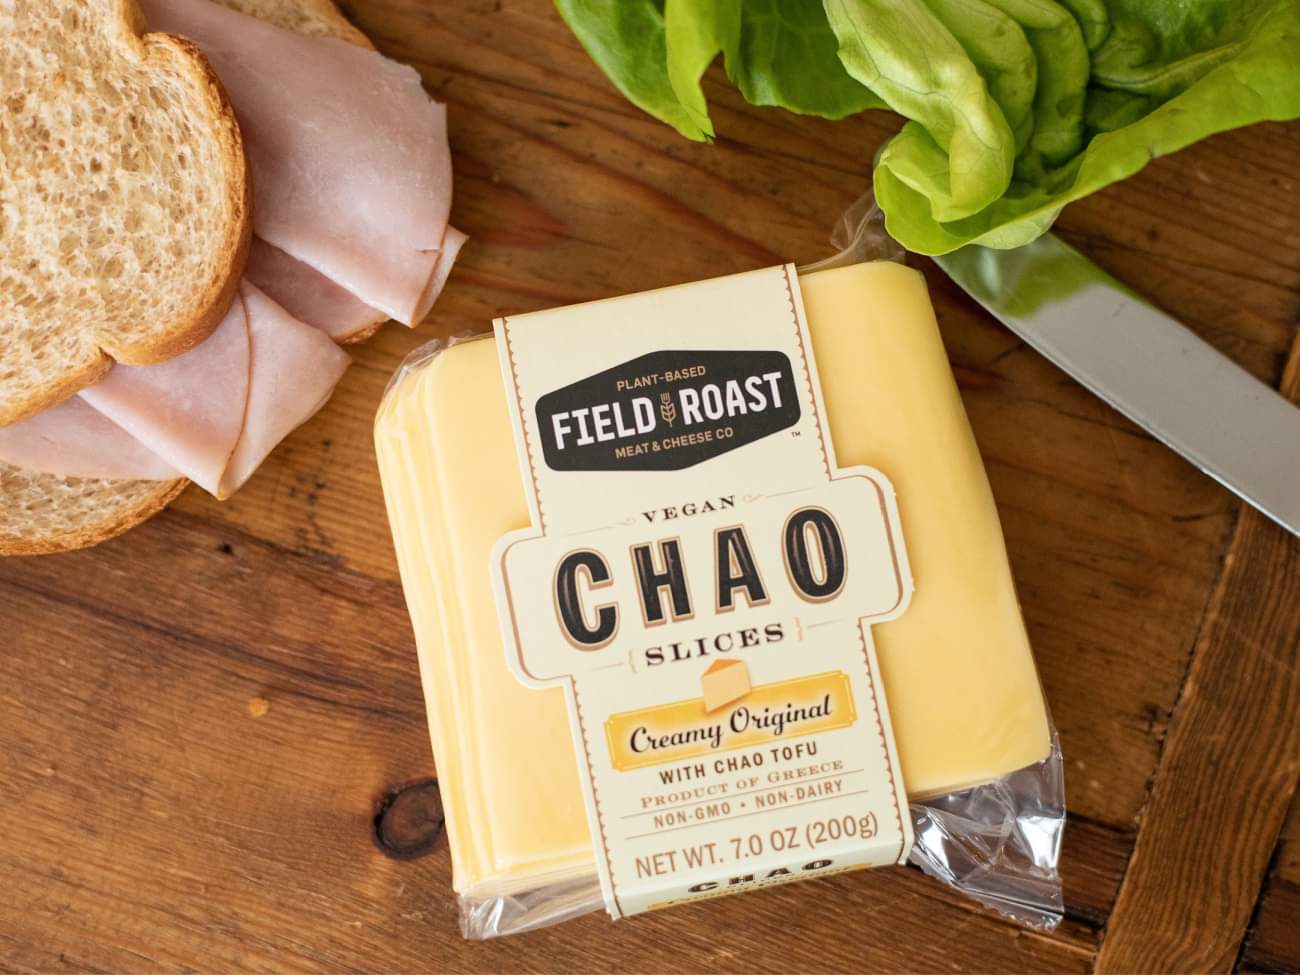 Get Field Roast Chao For Just $2.79 At Kroger.